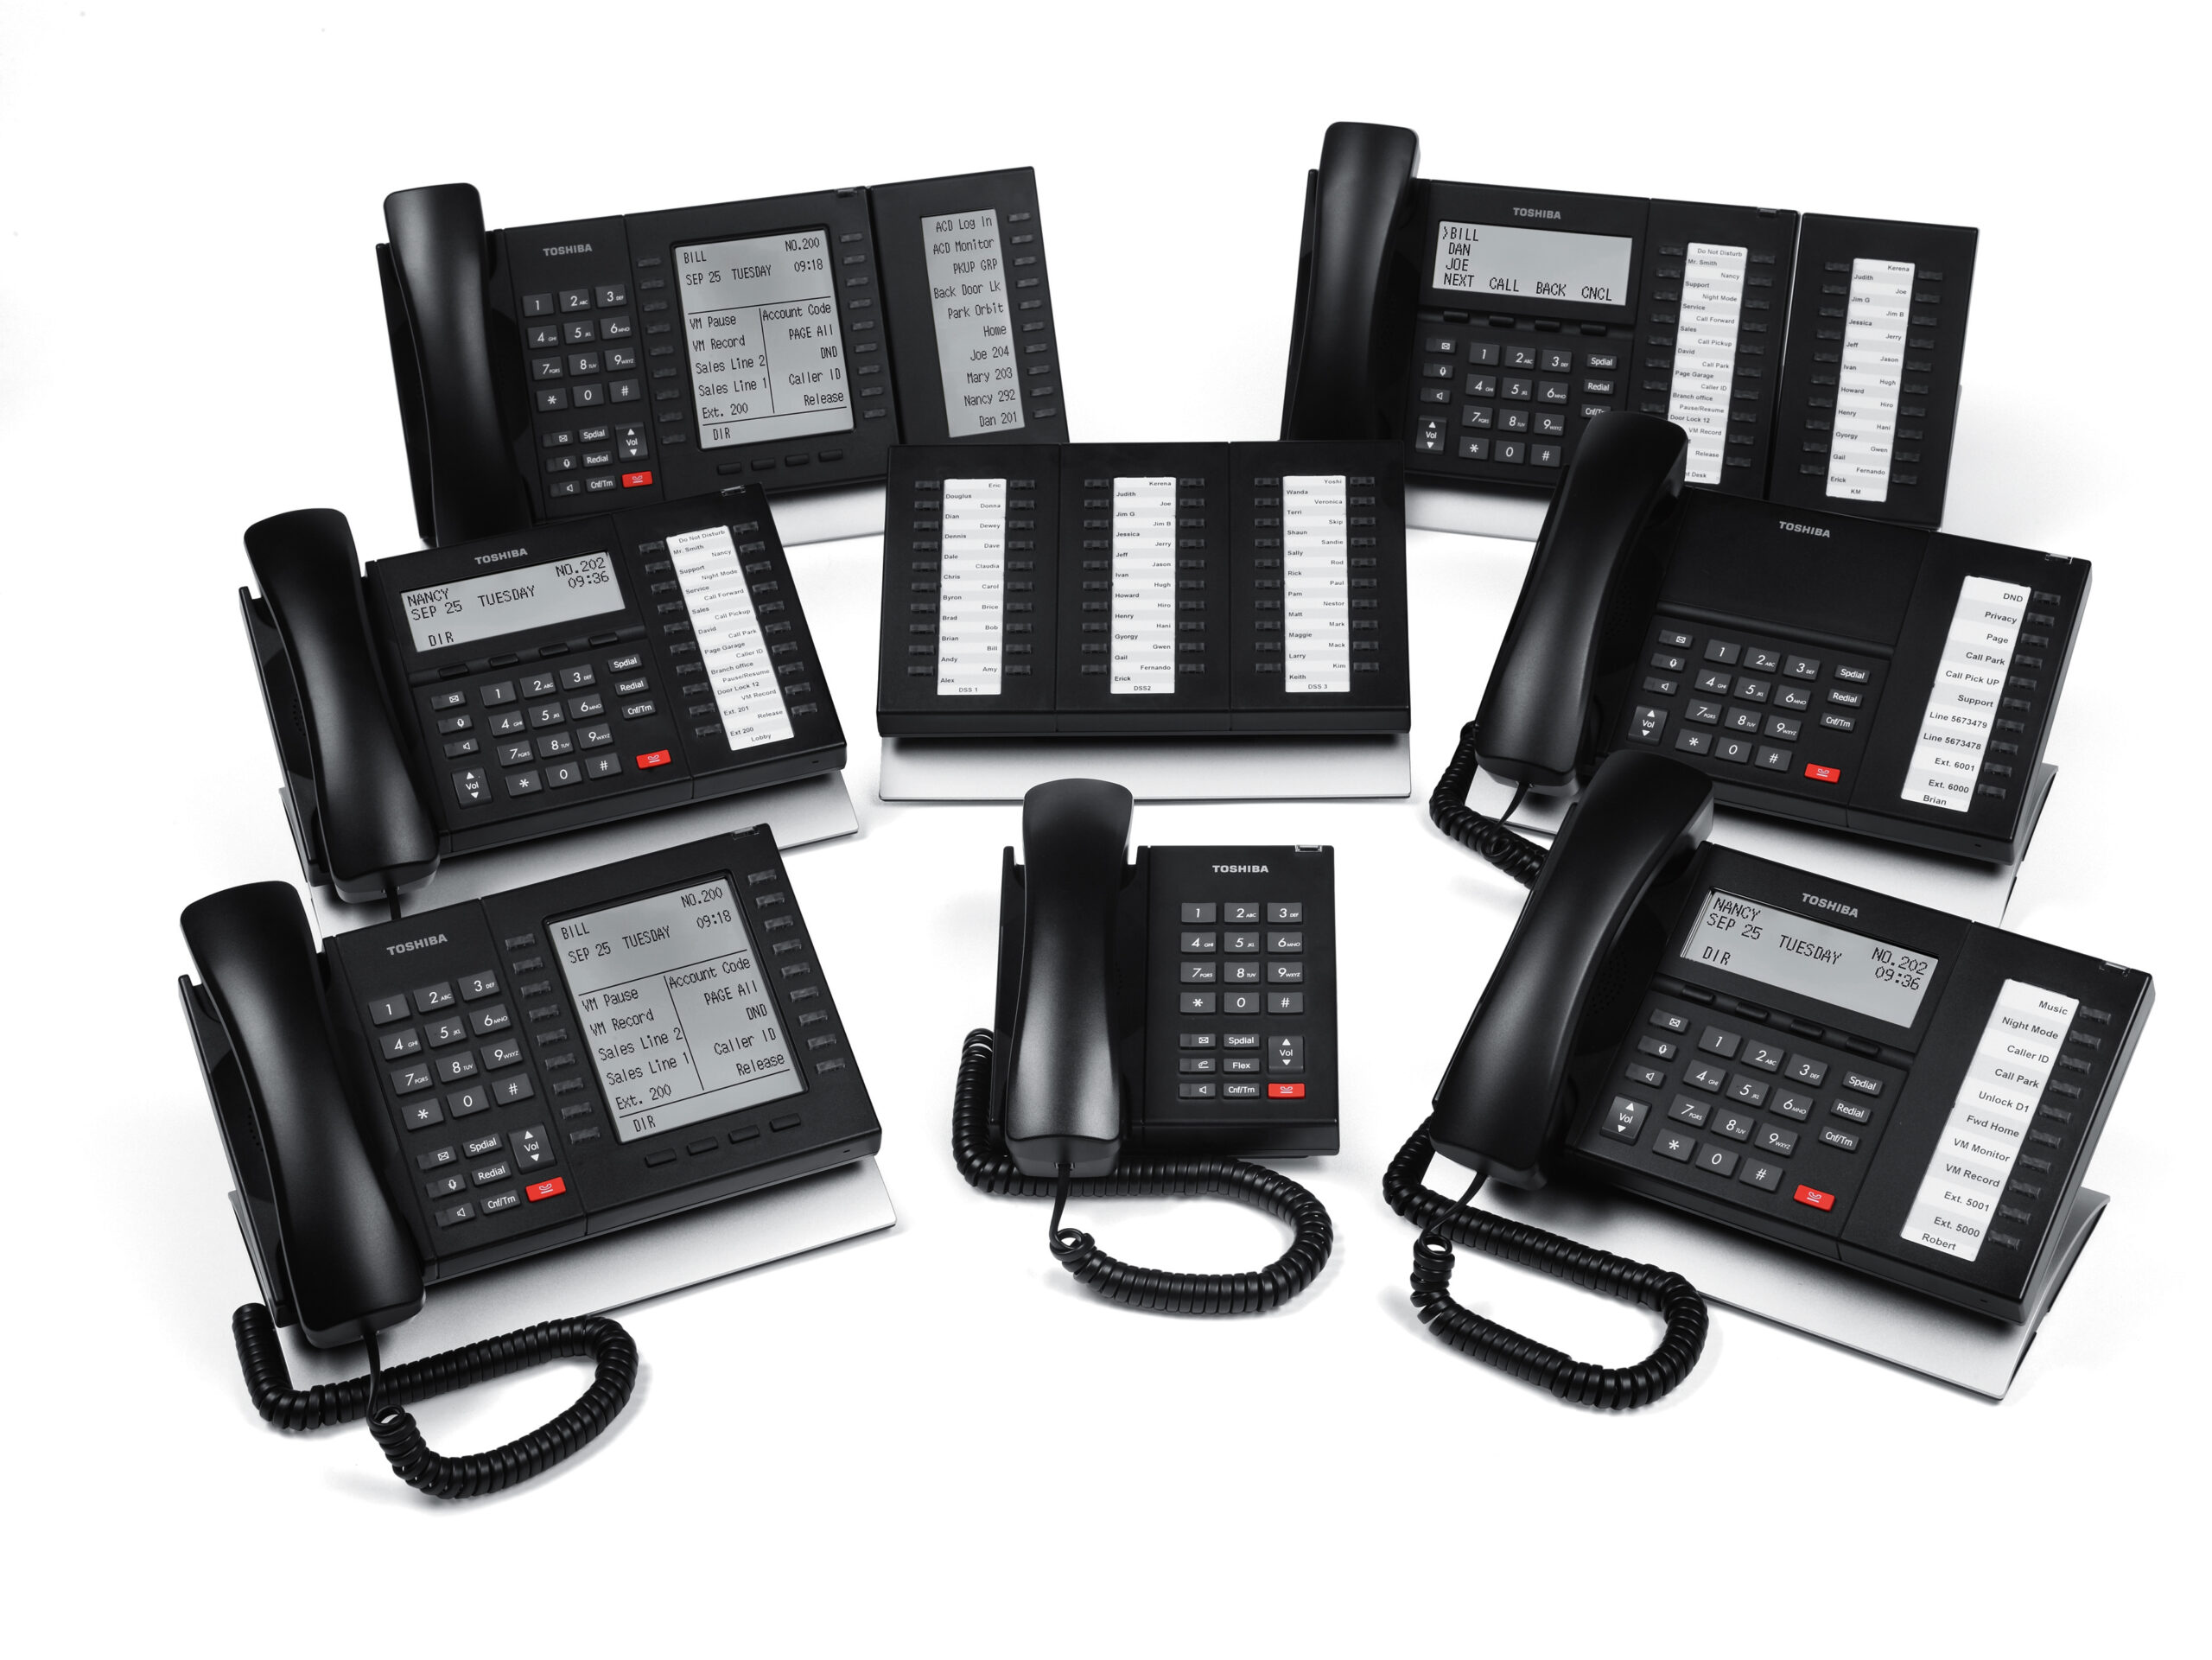 Enhancing Communication with Toshiba Phone Systems